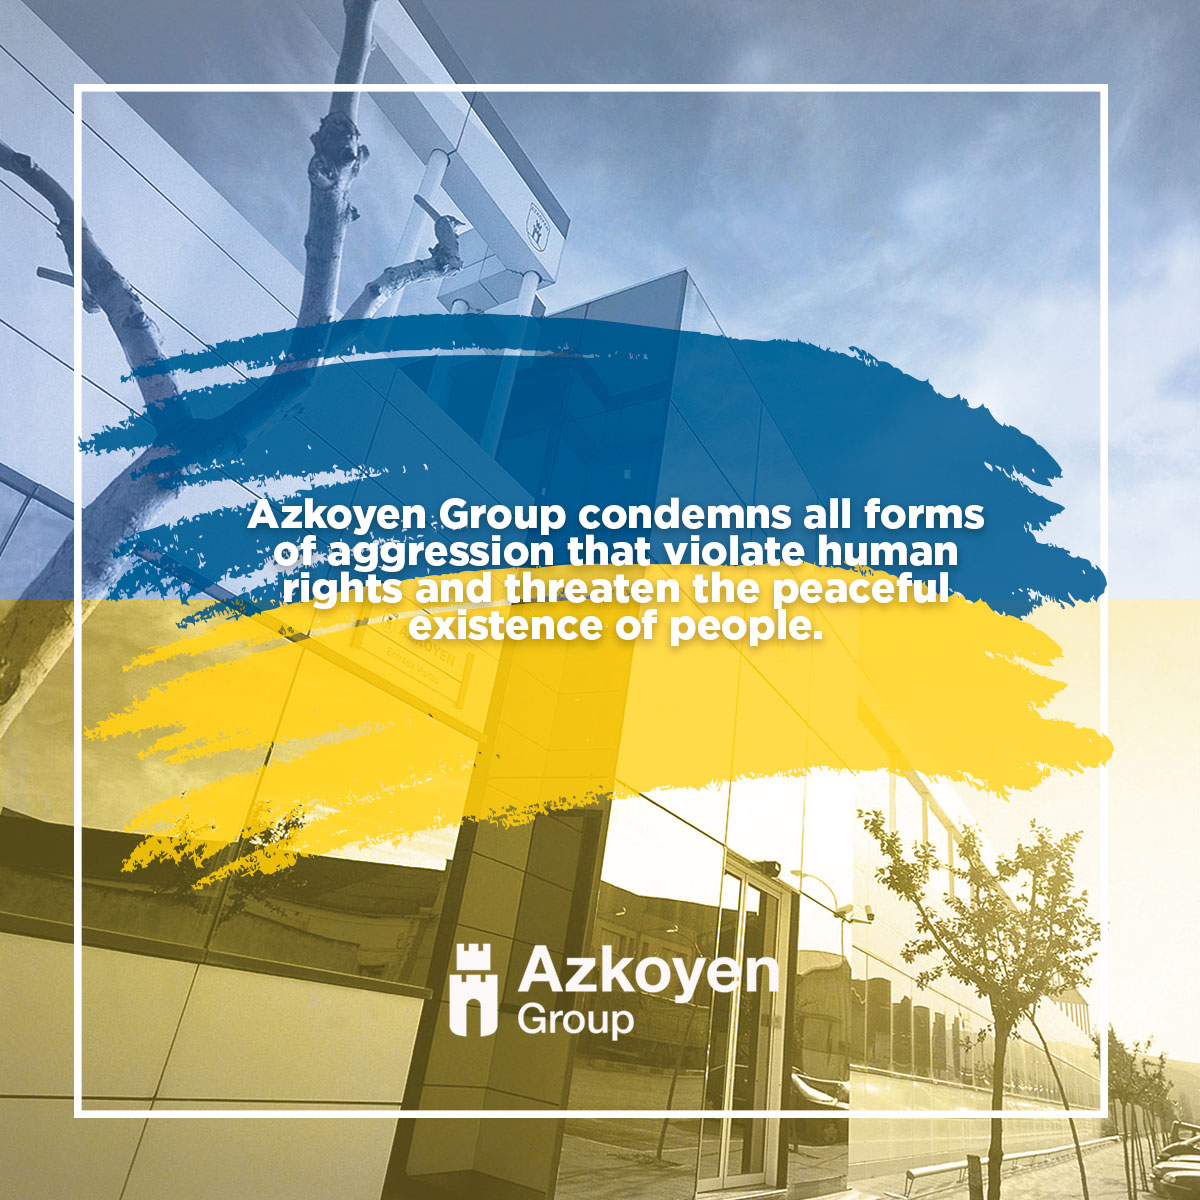 Azkoyen Group condemns all forms of aggression that violate human rights